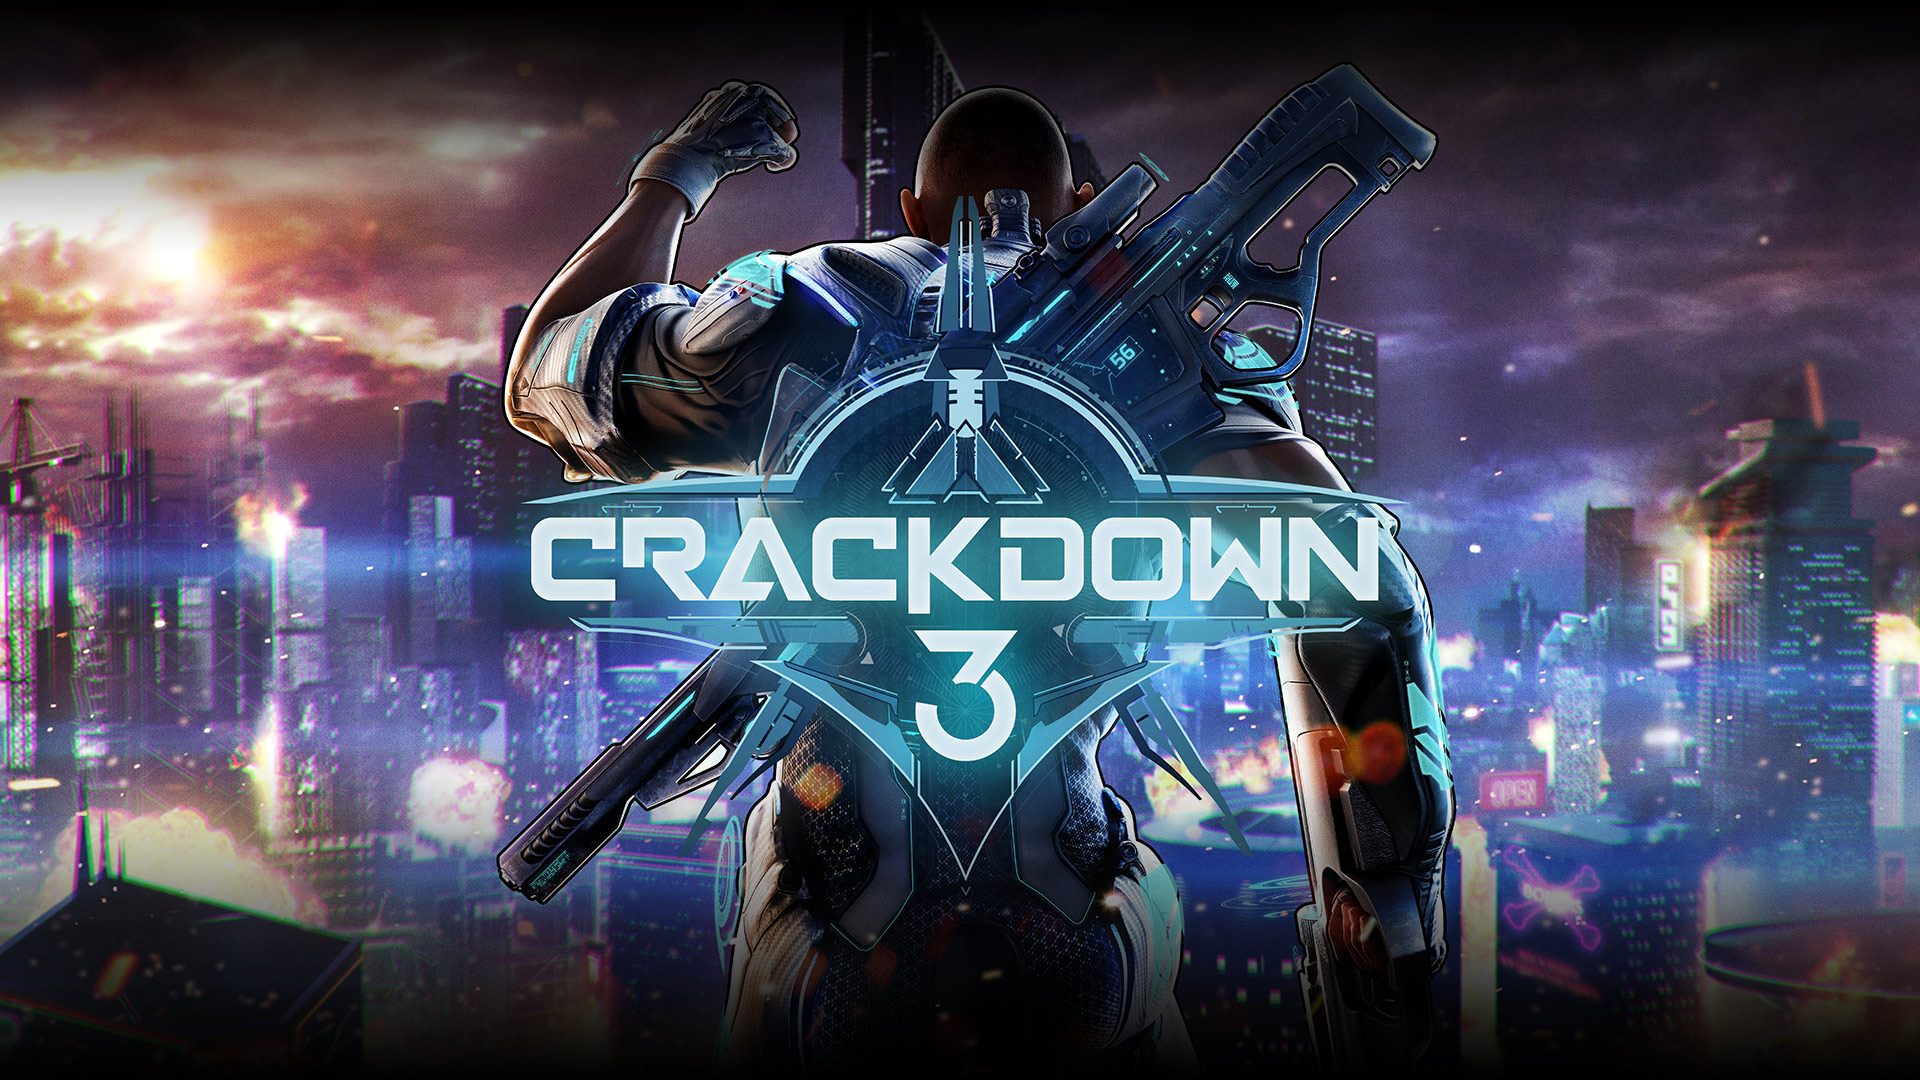 Play Crackdown 3 on Xbox before release in USA